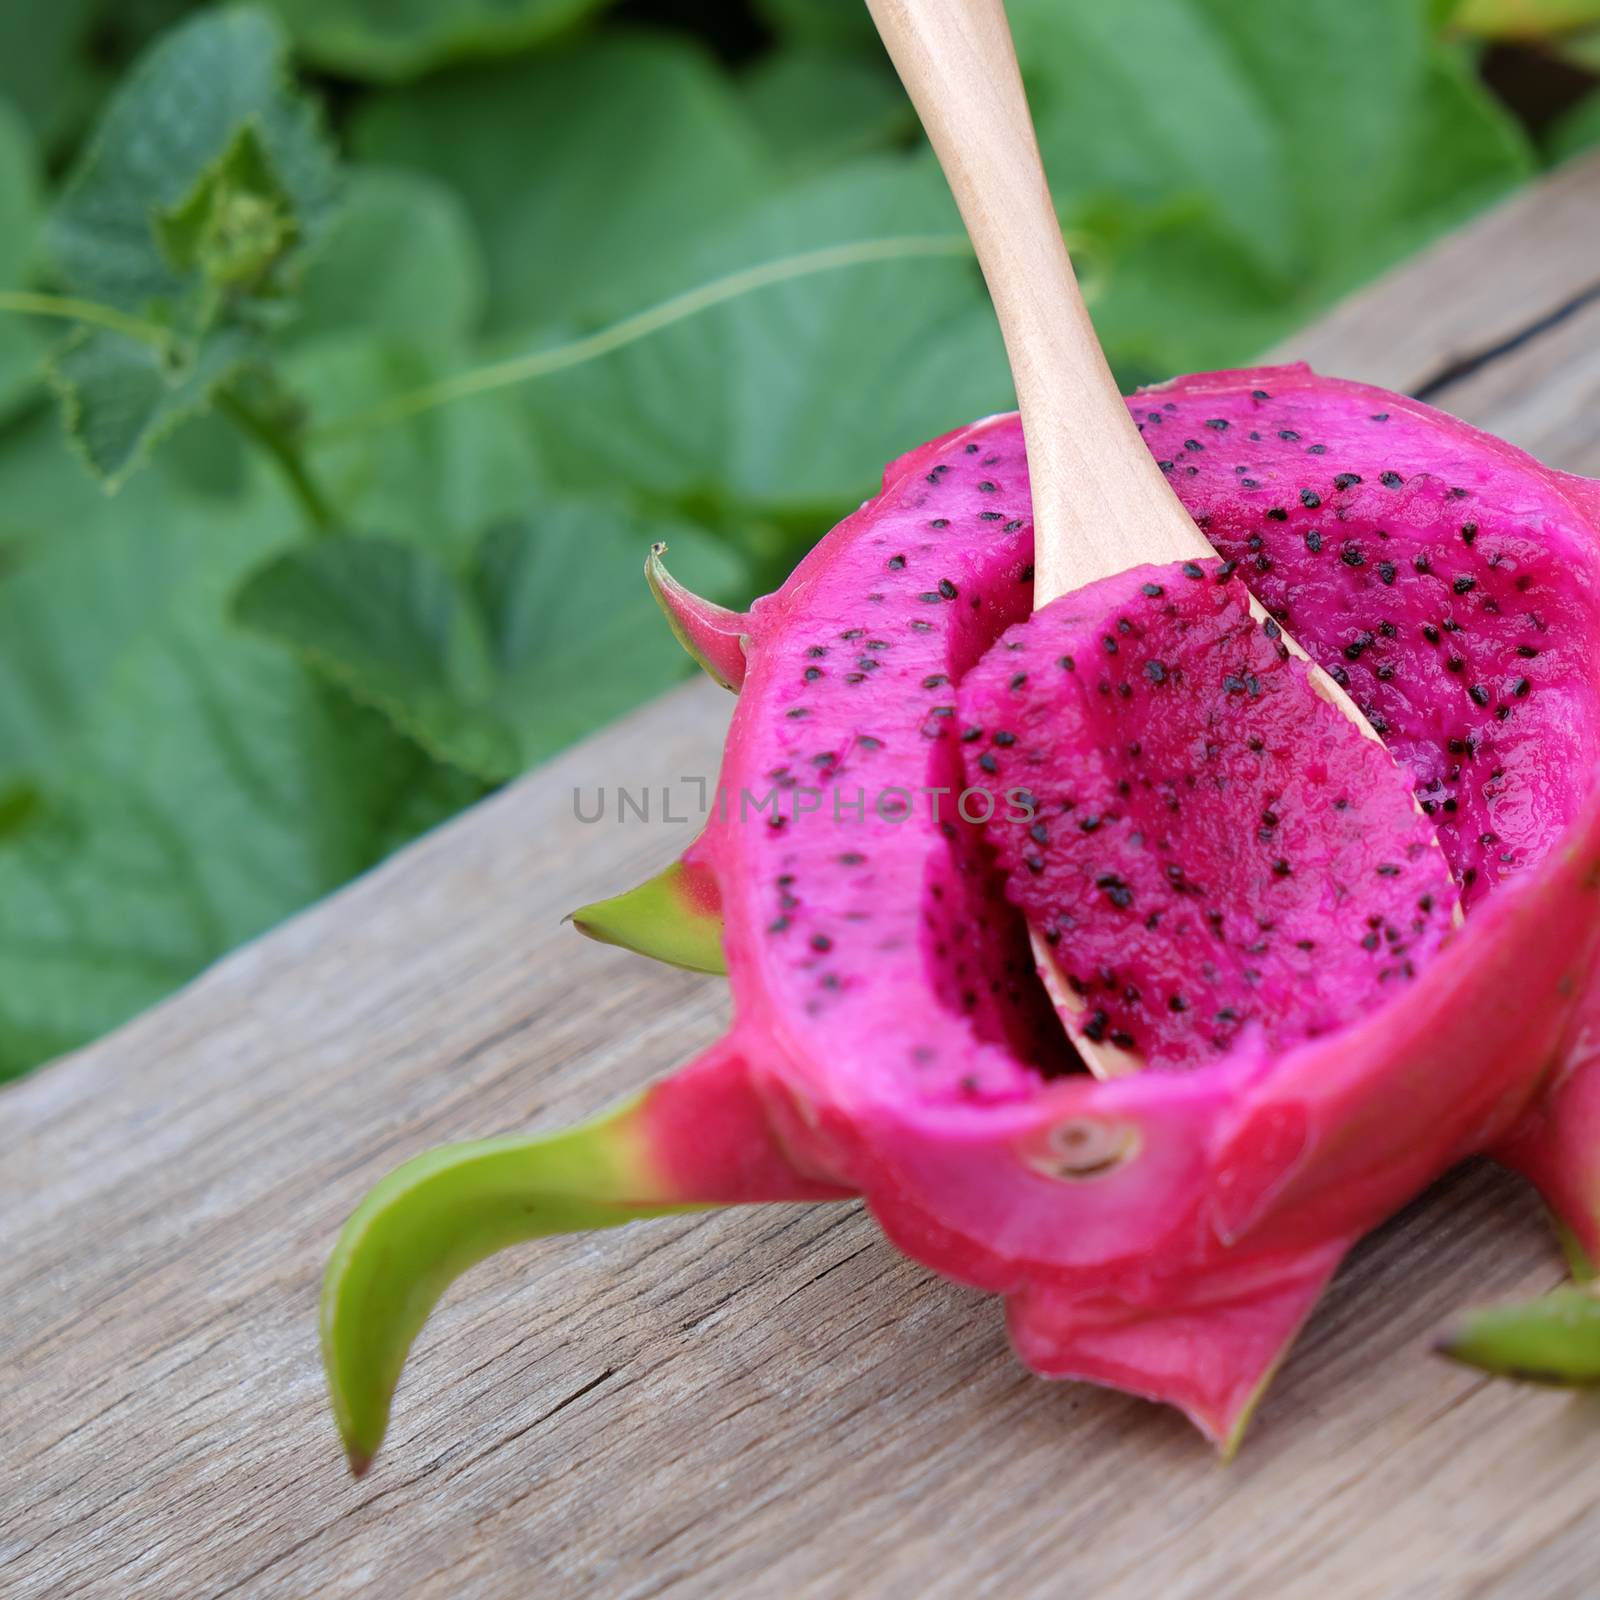 Eating dragon fruit, a tropical fruits, Vietnam agriculture product, with purle, pink color, close up of delicious dessert at garden